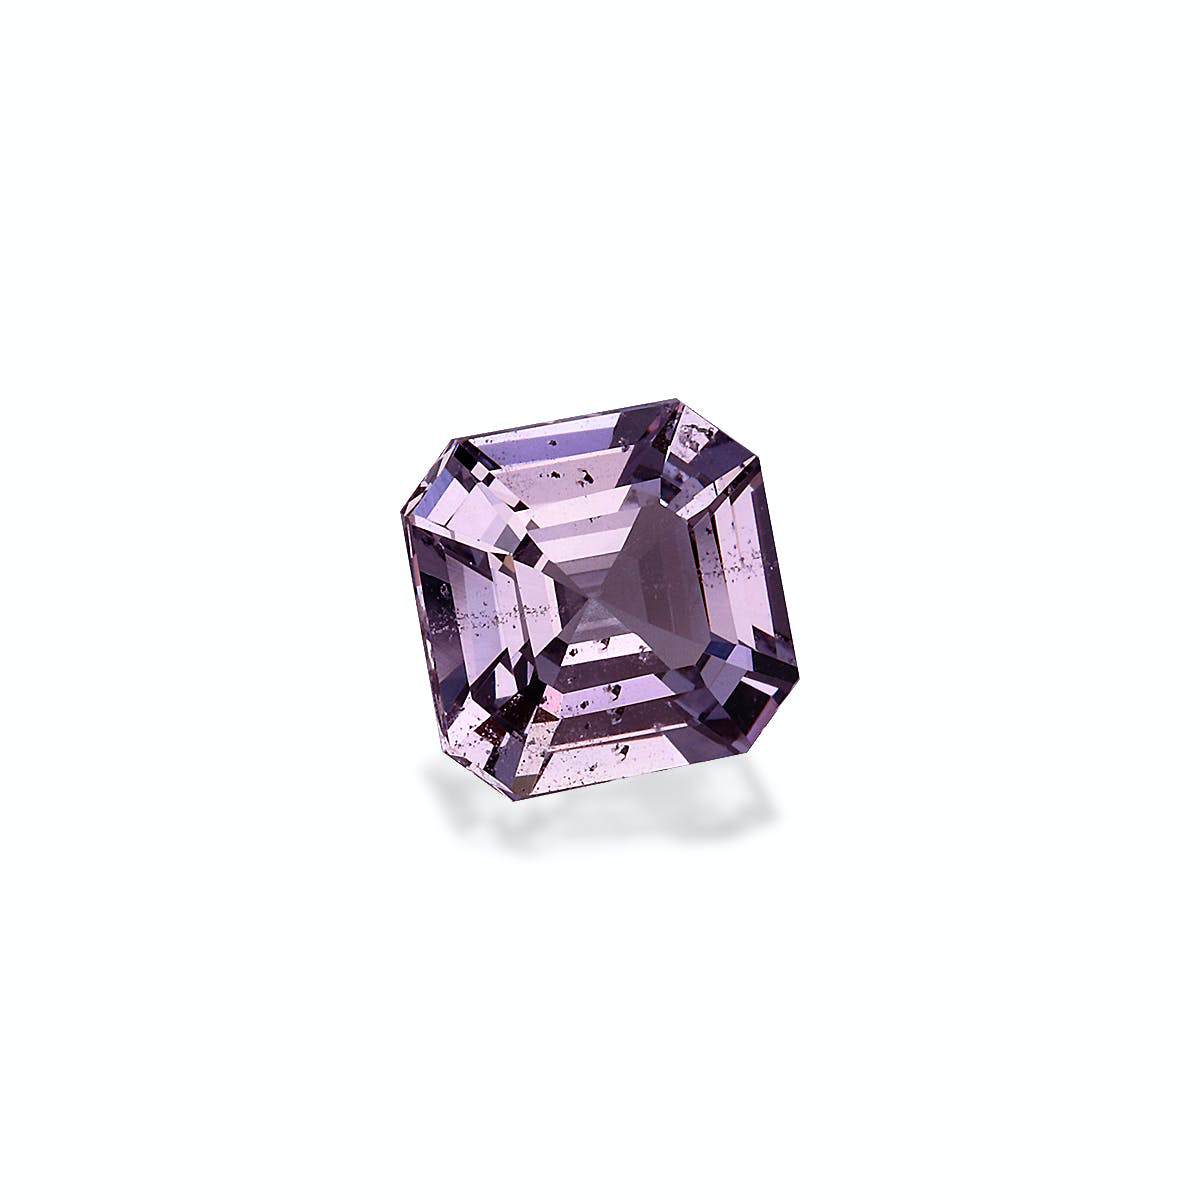 Picture of Mauve Purple Spinel 1.74ct - 7mm (SP0251)